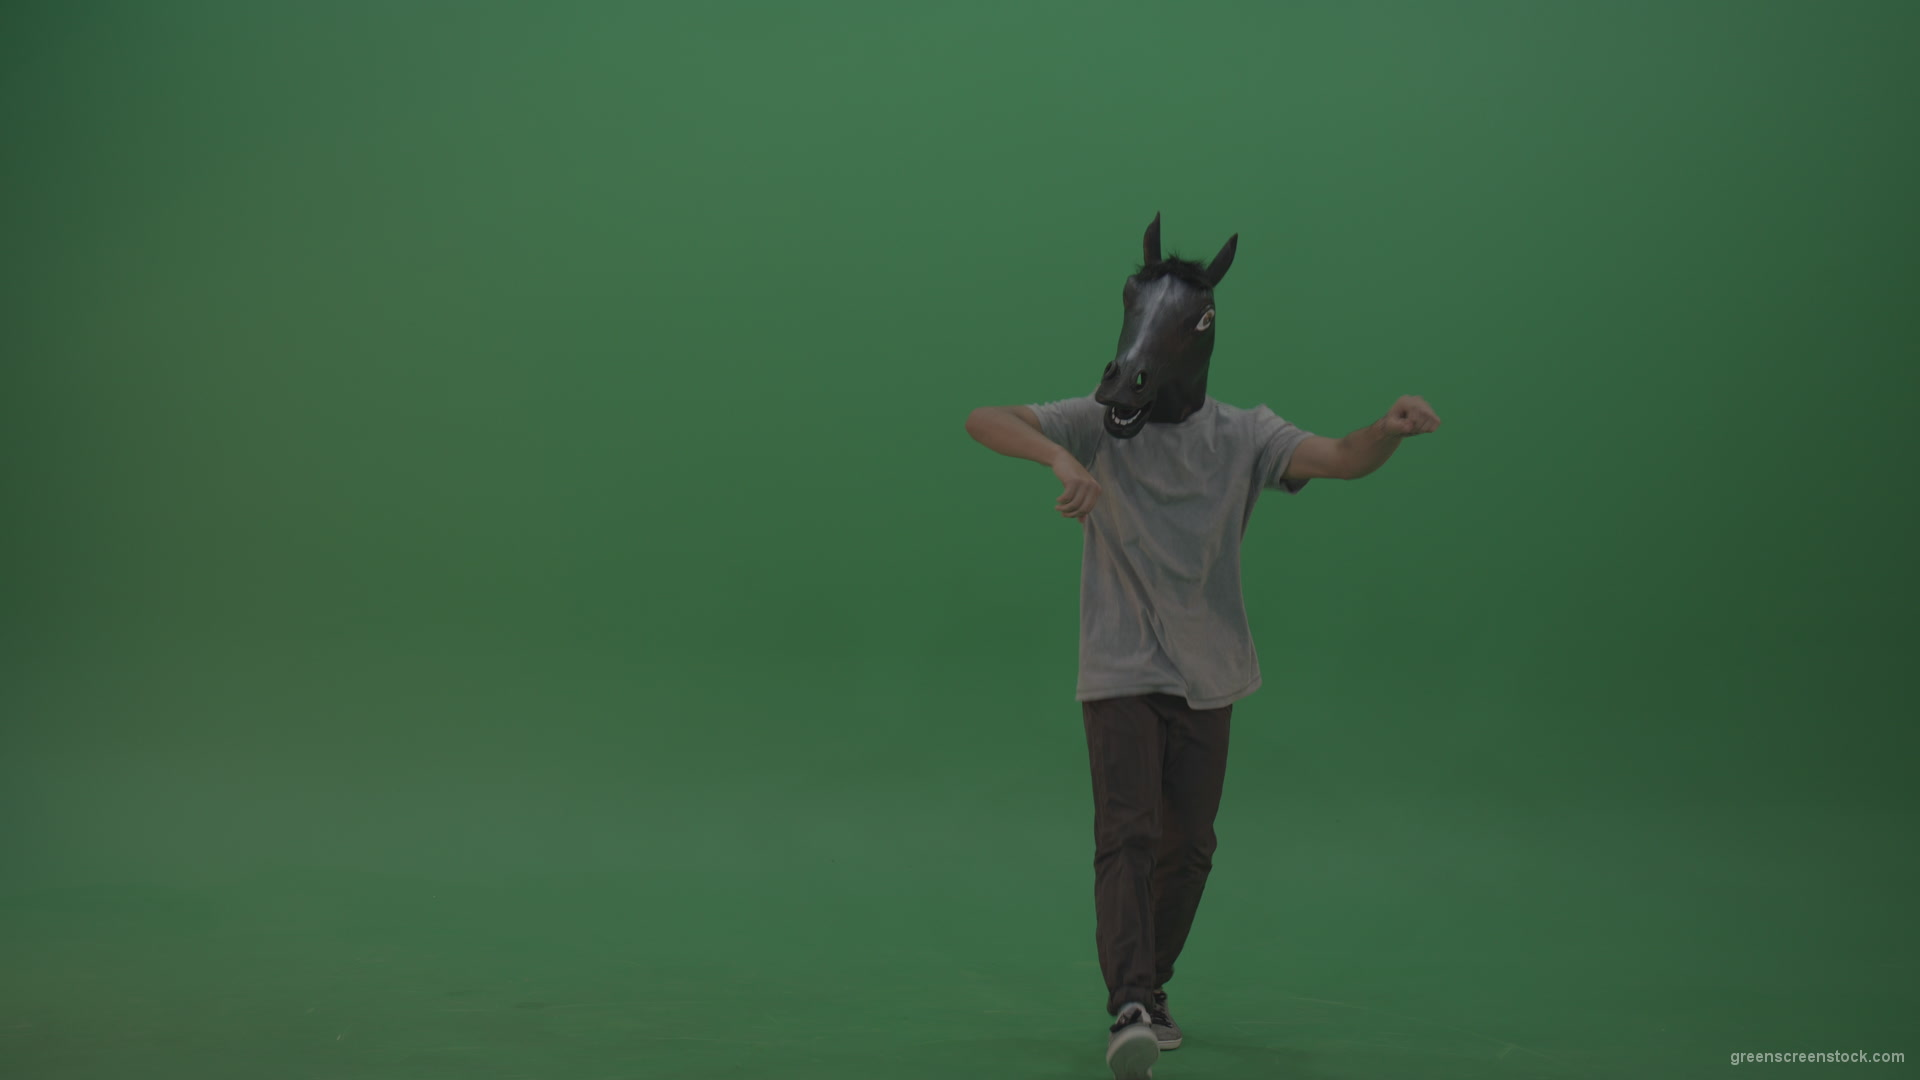 Boy-in-grey-wear-and-horse-head-costume-dances-over-green-screen-background_004 Green Screen Stock